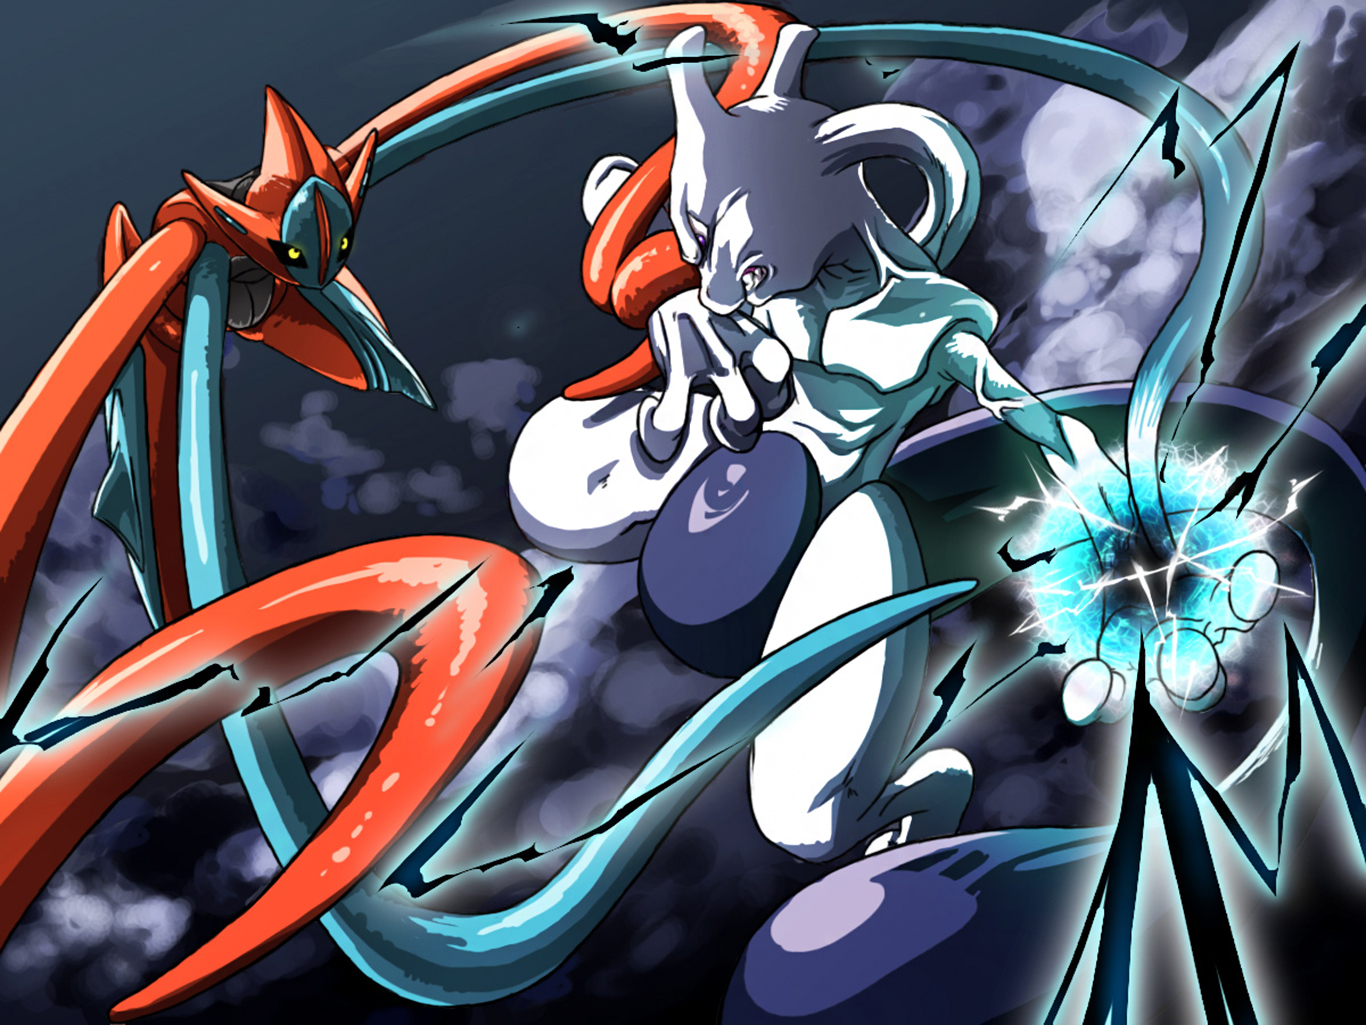 Mewtwo Vs Deoxys by まくまく